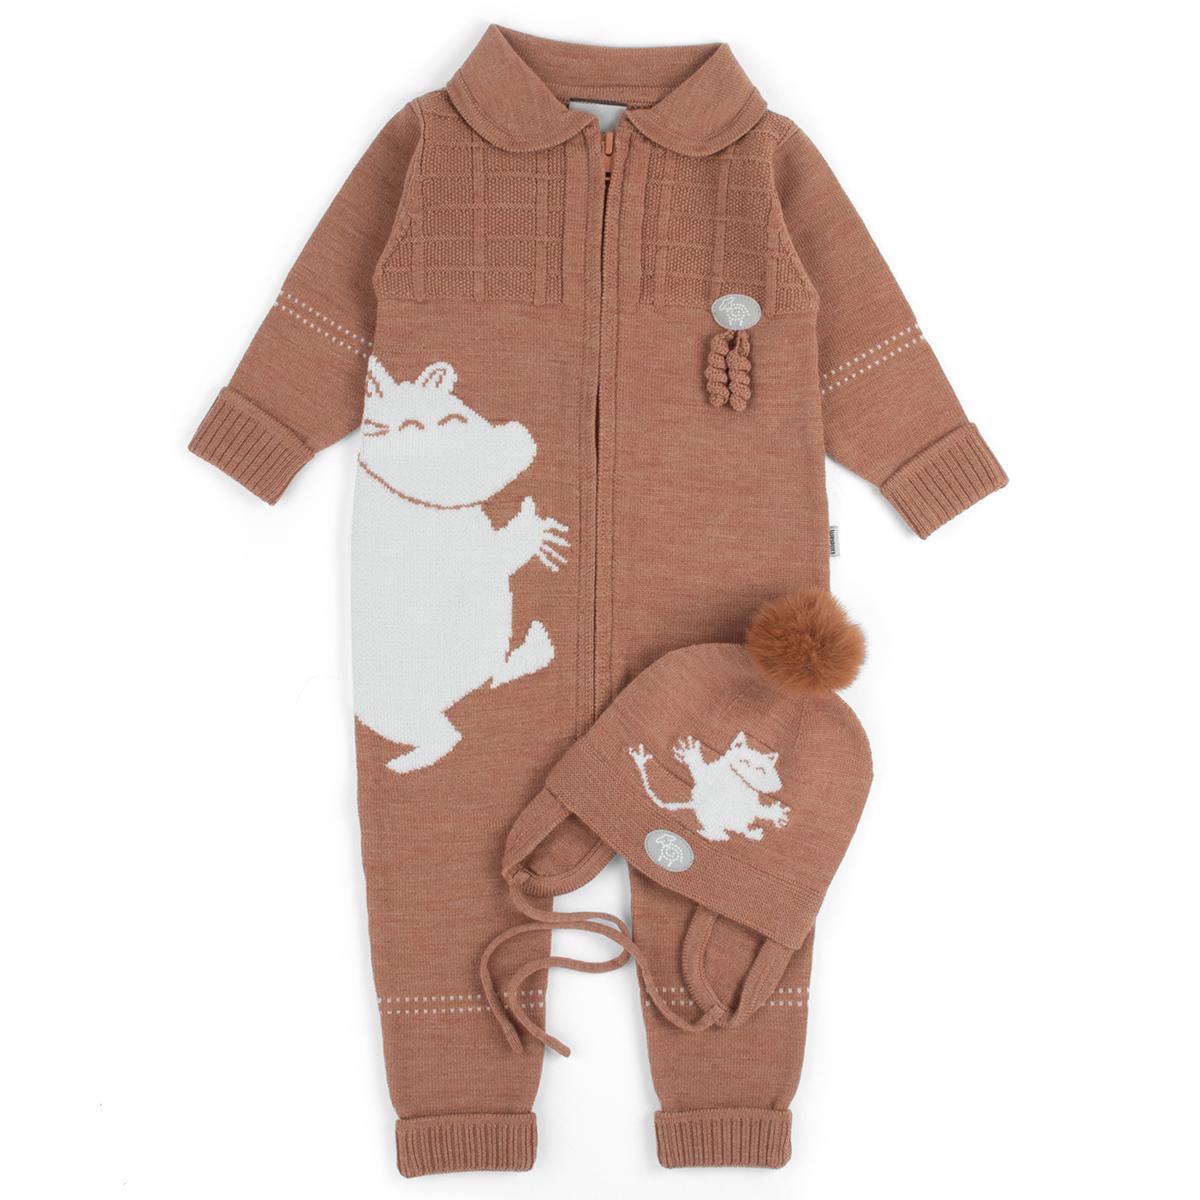 Baby  toddler clothing, Outerwear, Sleeve, Textile, Grey, Collar, Fawn, T-shirt